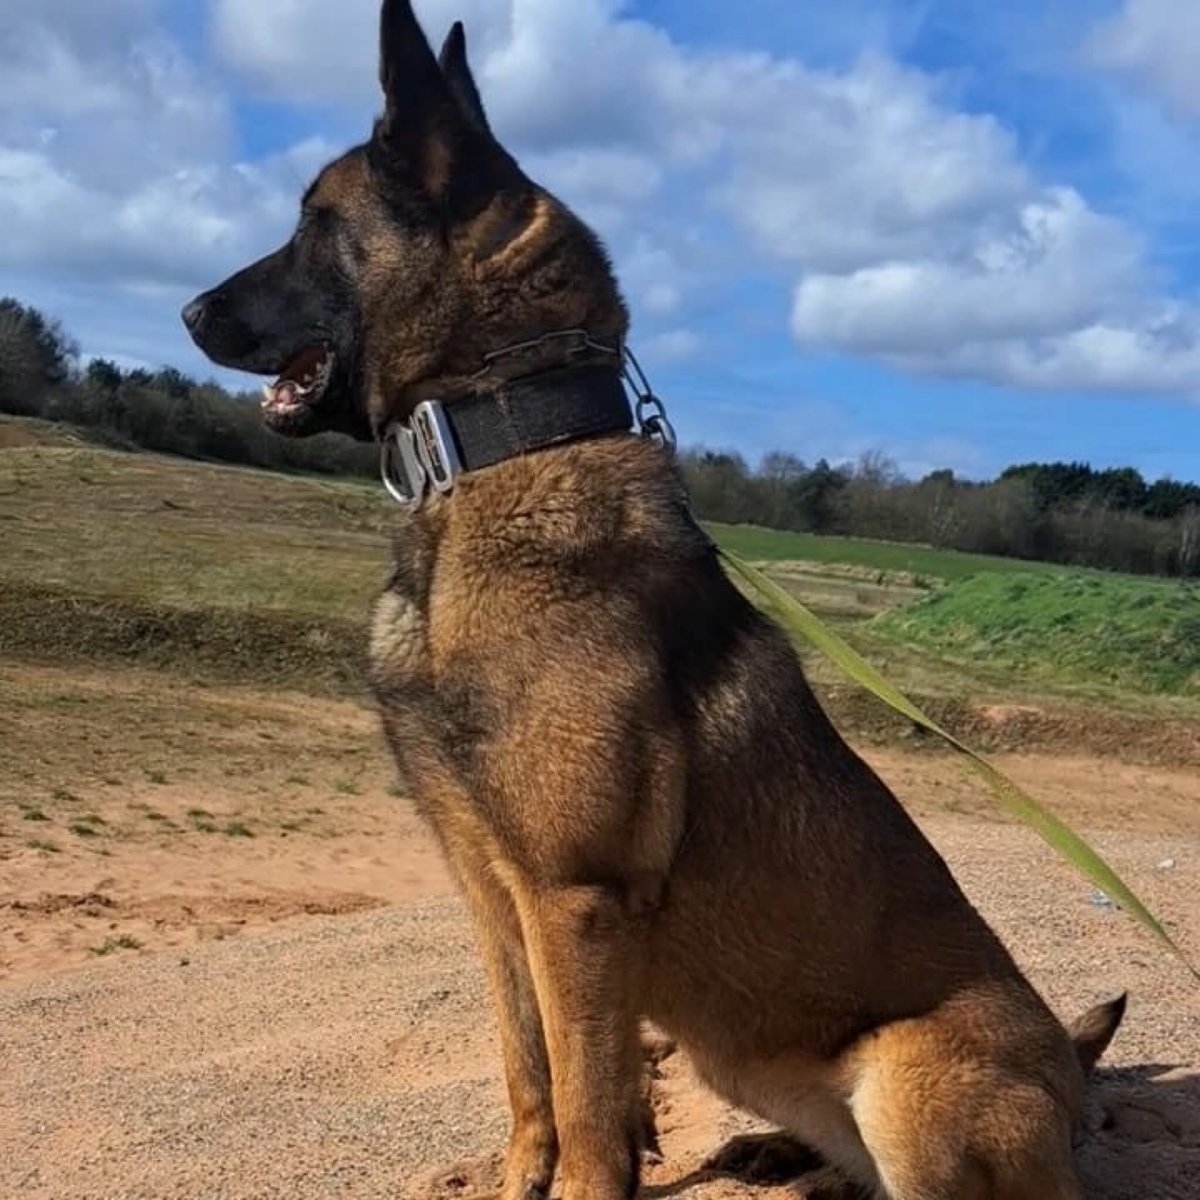 Grit, determination, patience and a little game of hide and seek resulted in one male arrested for theft offences and stolen property recovered for PD Jax and handler following a lengthy search in Warrington last night